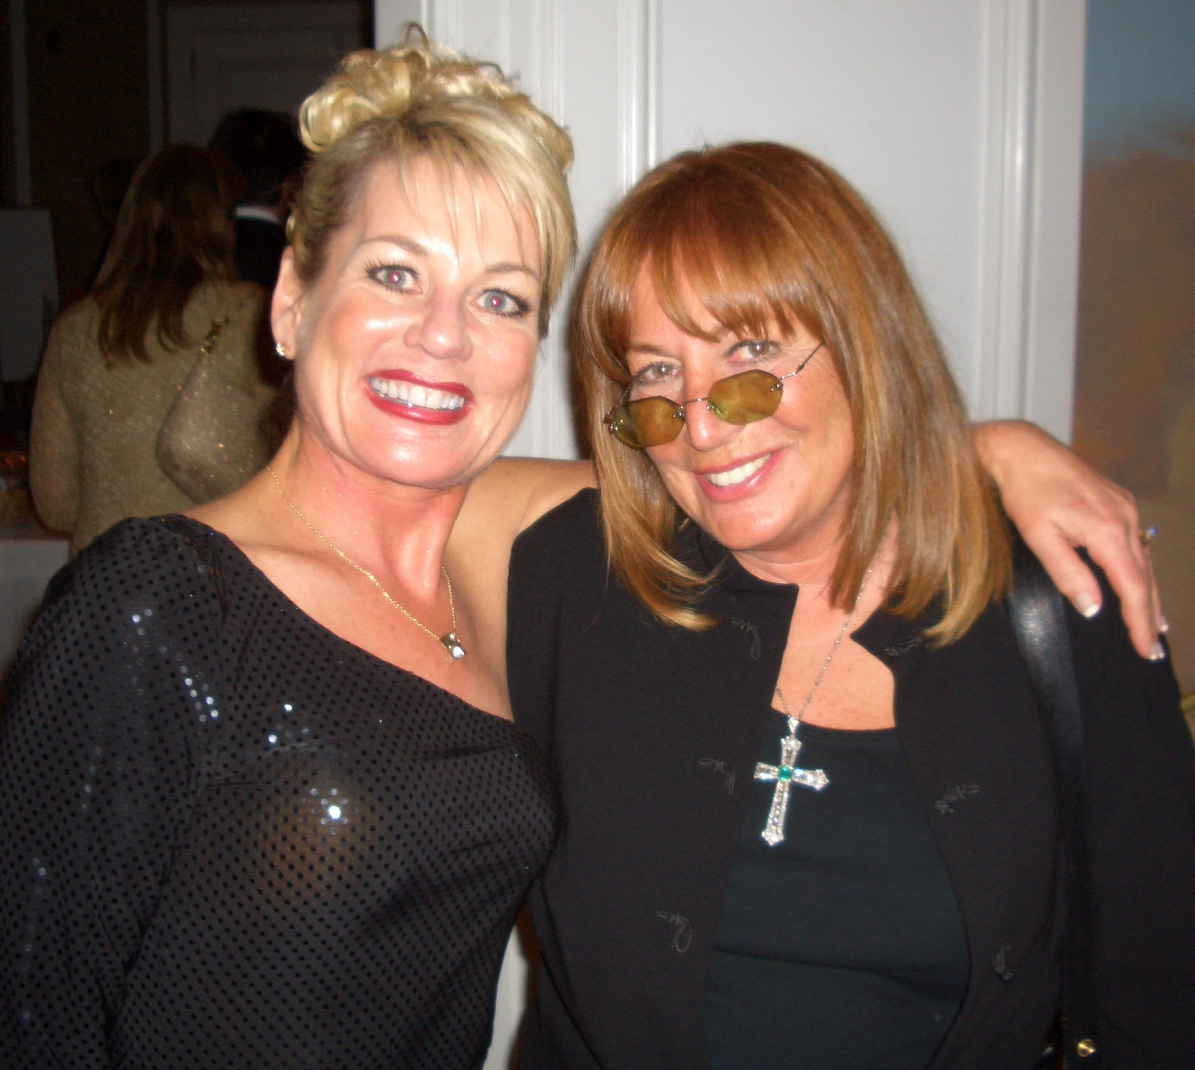 Kandra King with Honoree Penny Marshall at the first Annual Gala event for CARRY.